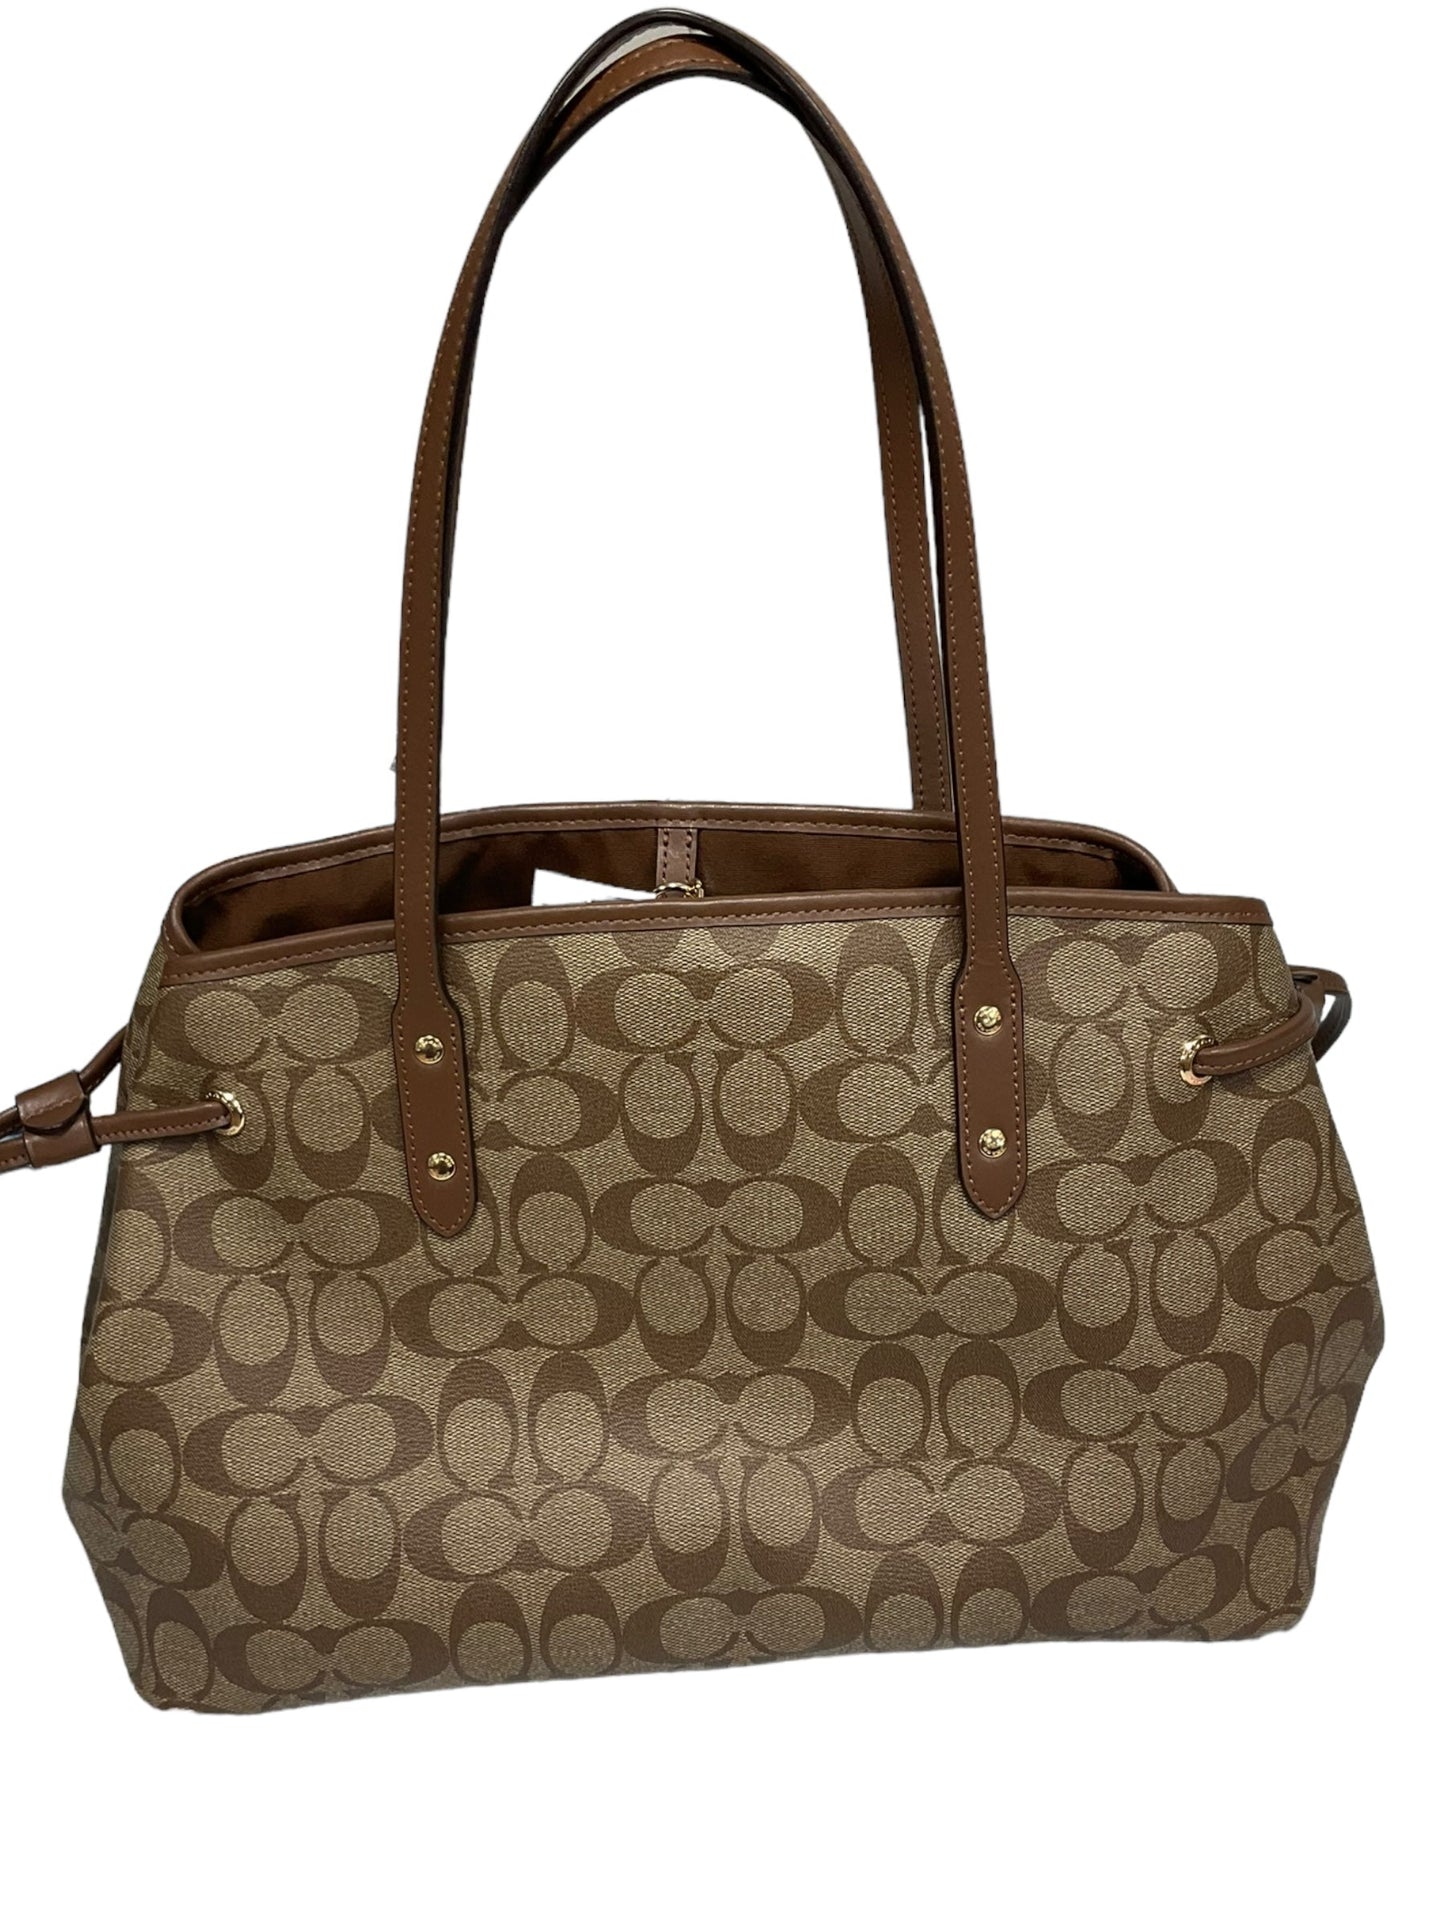 Handbag Leather By Coach  Size: Large